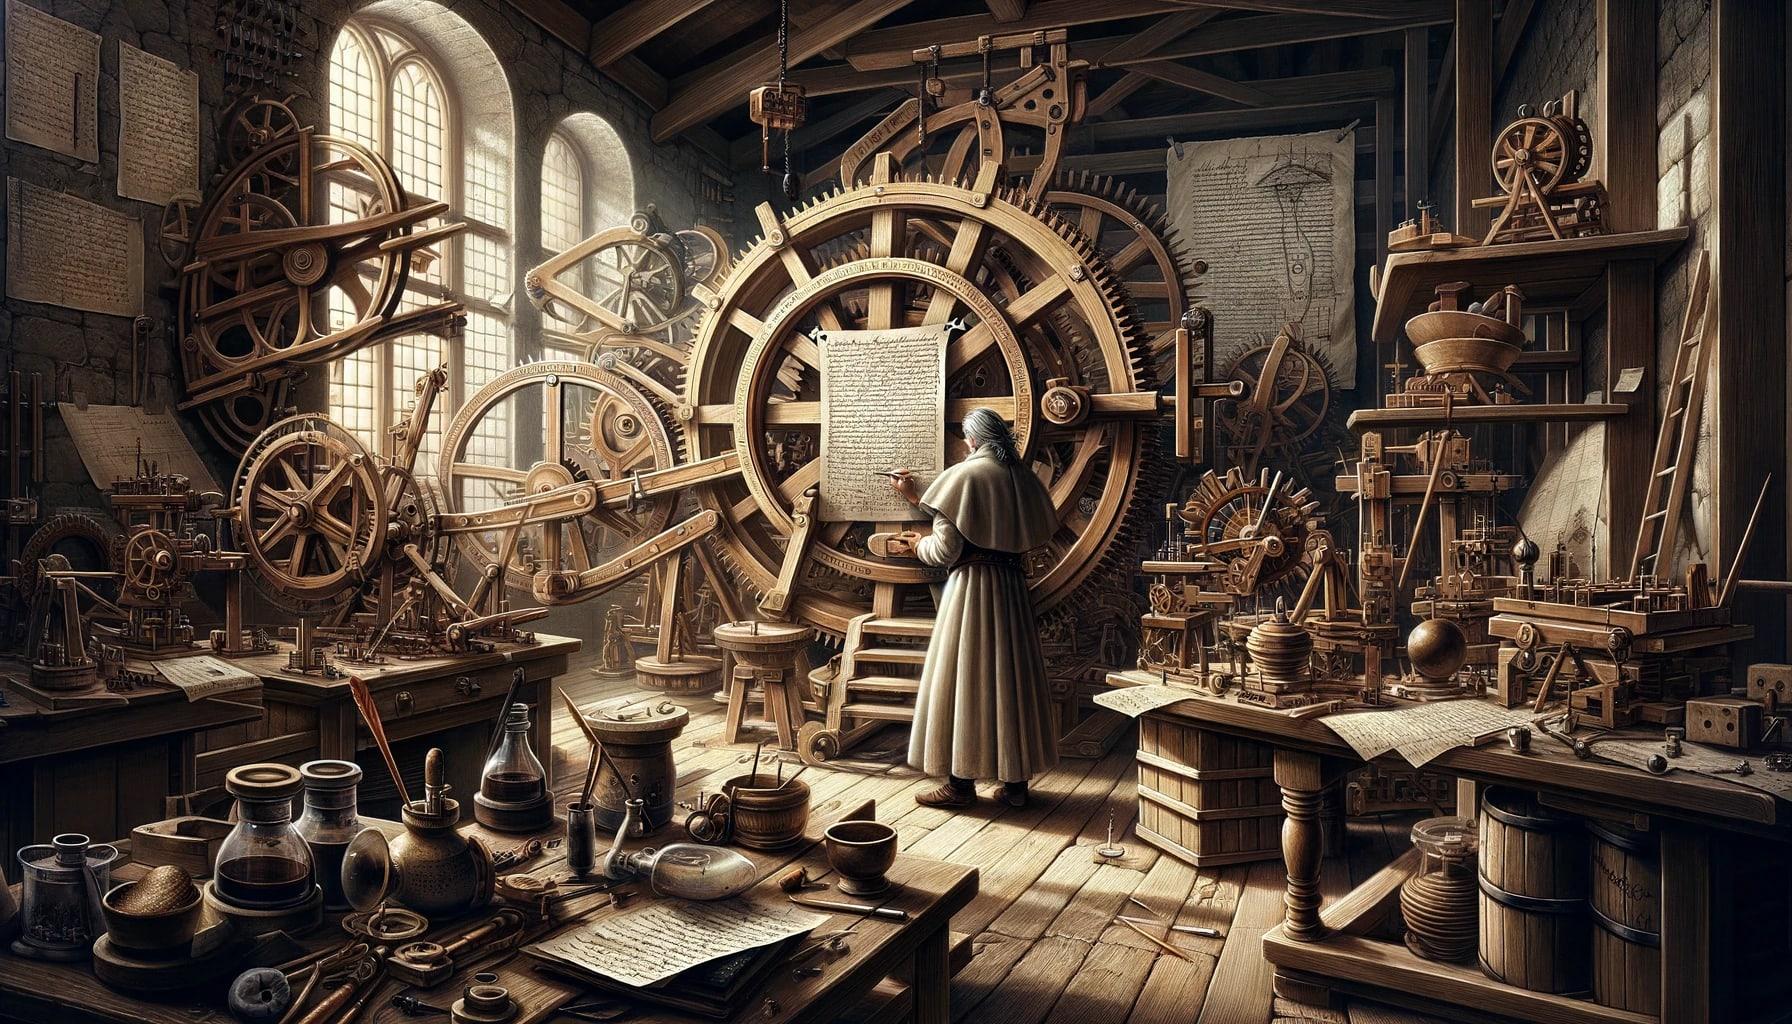 Richly detailed historical illustration of a Renaissance-era inventor's workshop, filled with intricate gears, mechanical devices, and scientific instruments. A lone figure stands, absorbed in reading a document amidst the grand machinery of innovation. This image is evocative of the age of discovery, perfect for content relating to the history of science, the evolution of machinery, and the inventive spirit of the past.